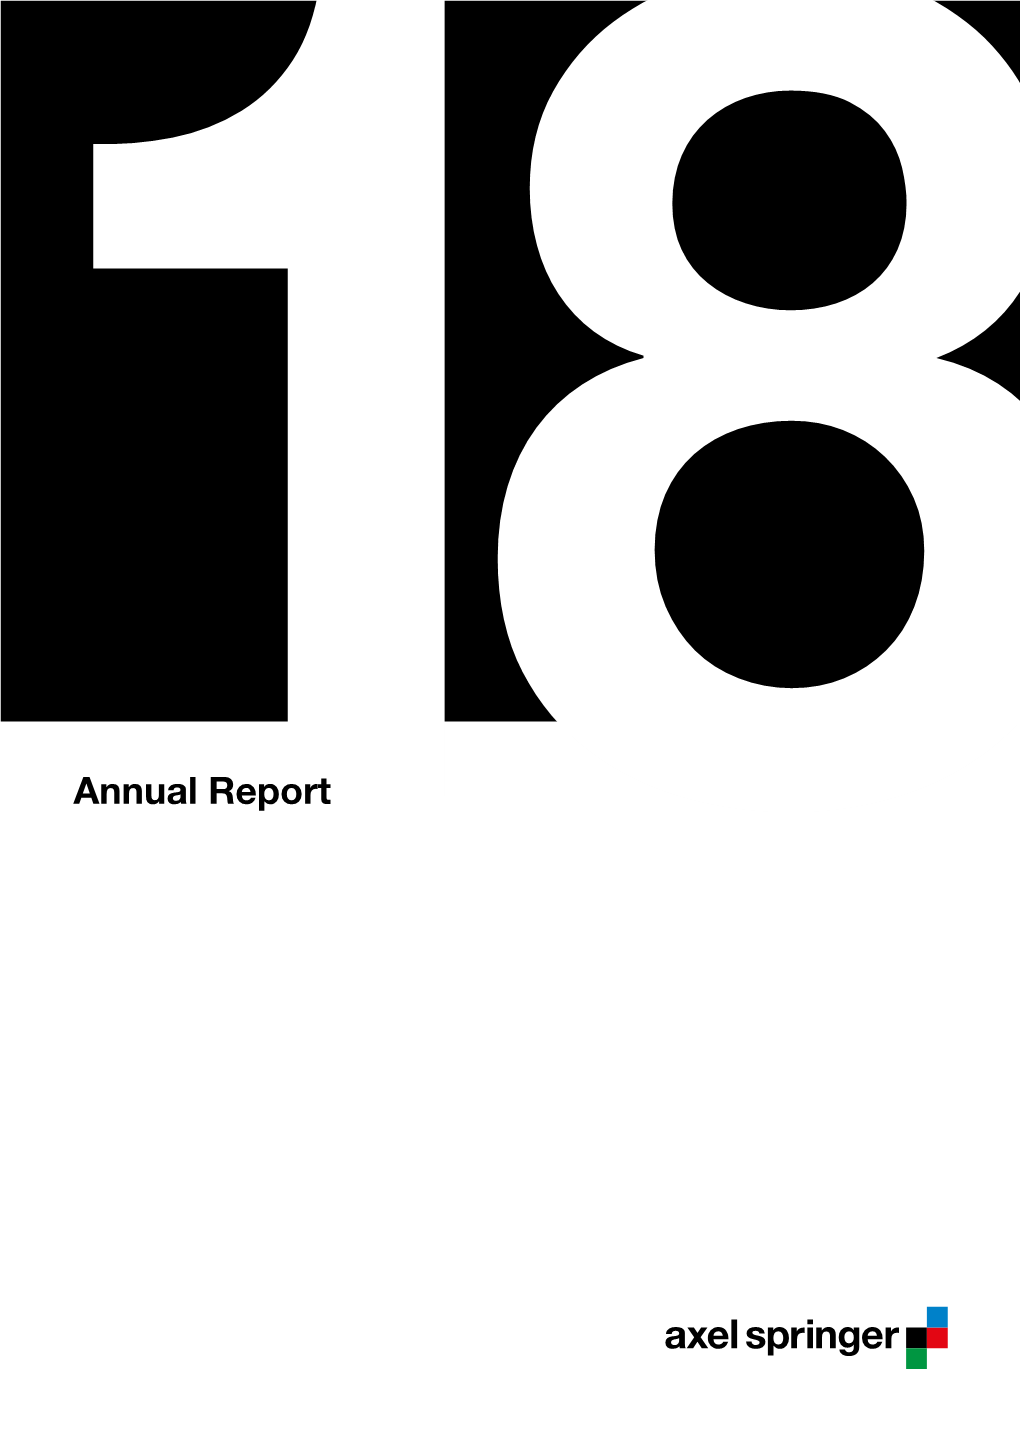 Axel Springer Annual Report 2018